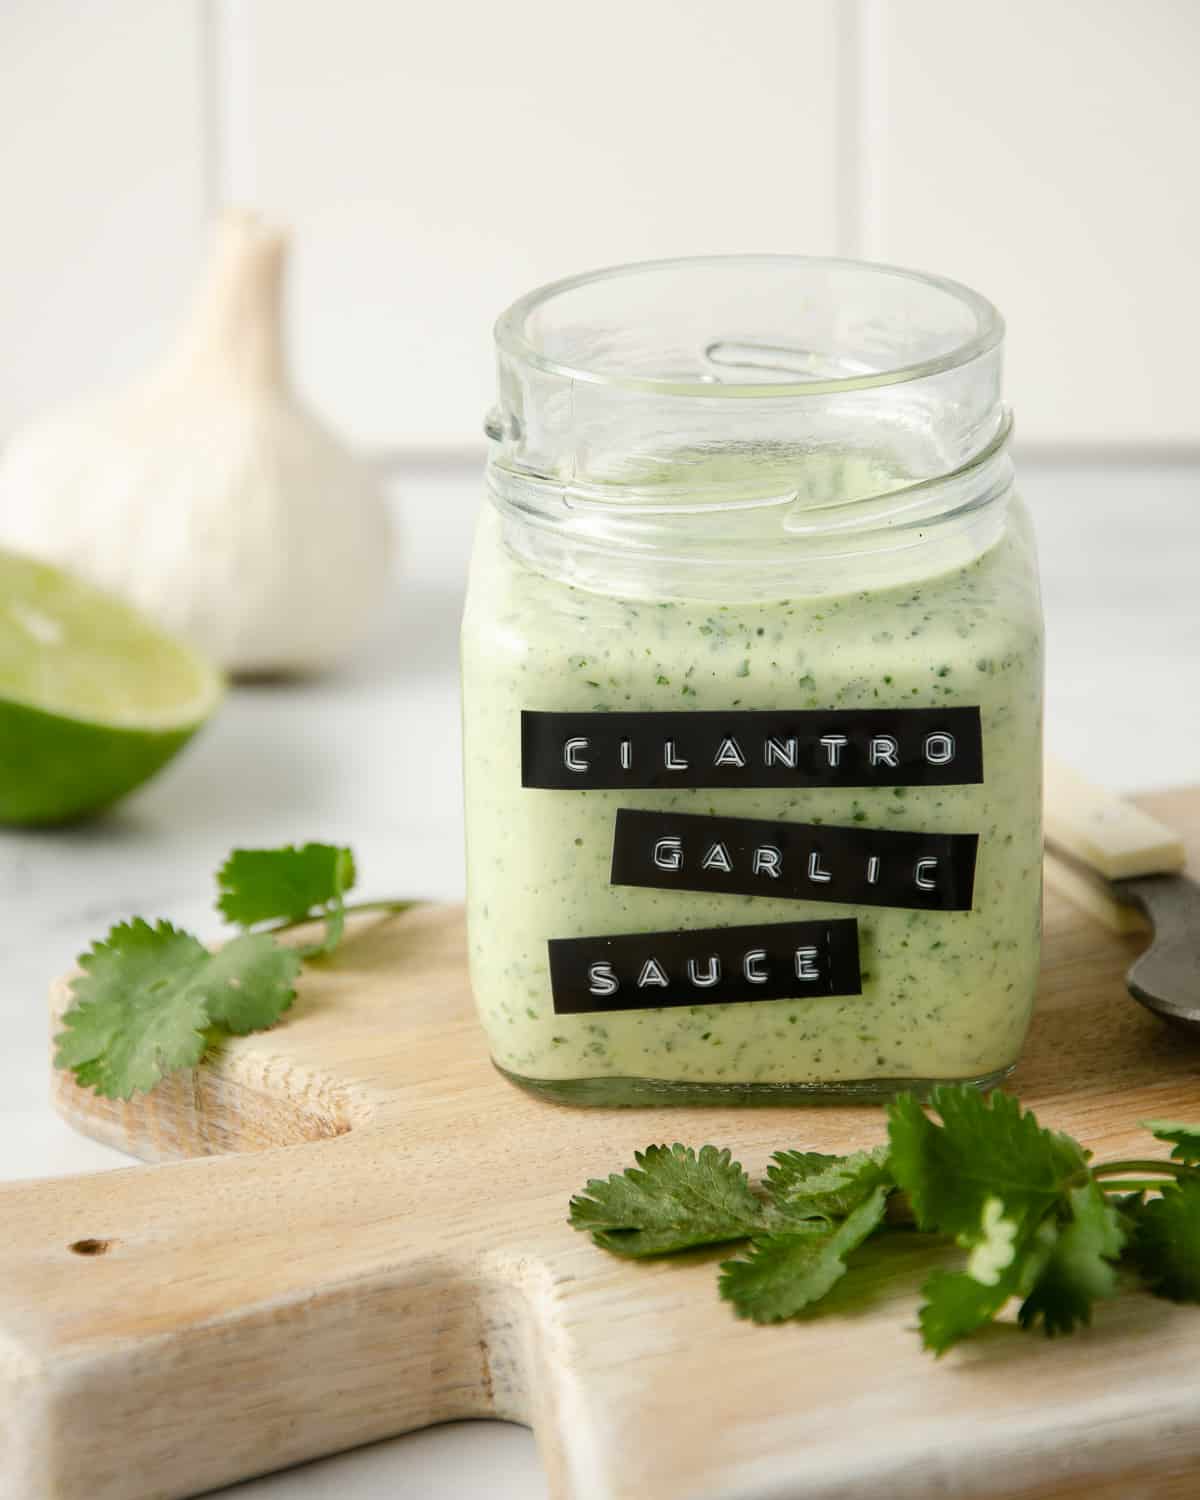 Blended cilantro garlic sauce in a jar on a cutting board with cilantro leaves next to it and limes and garlic in the background.